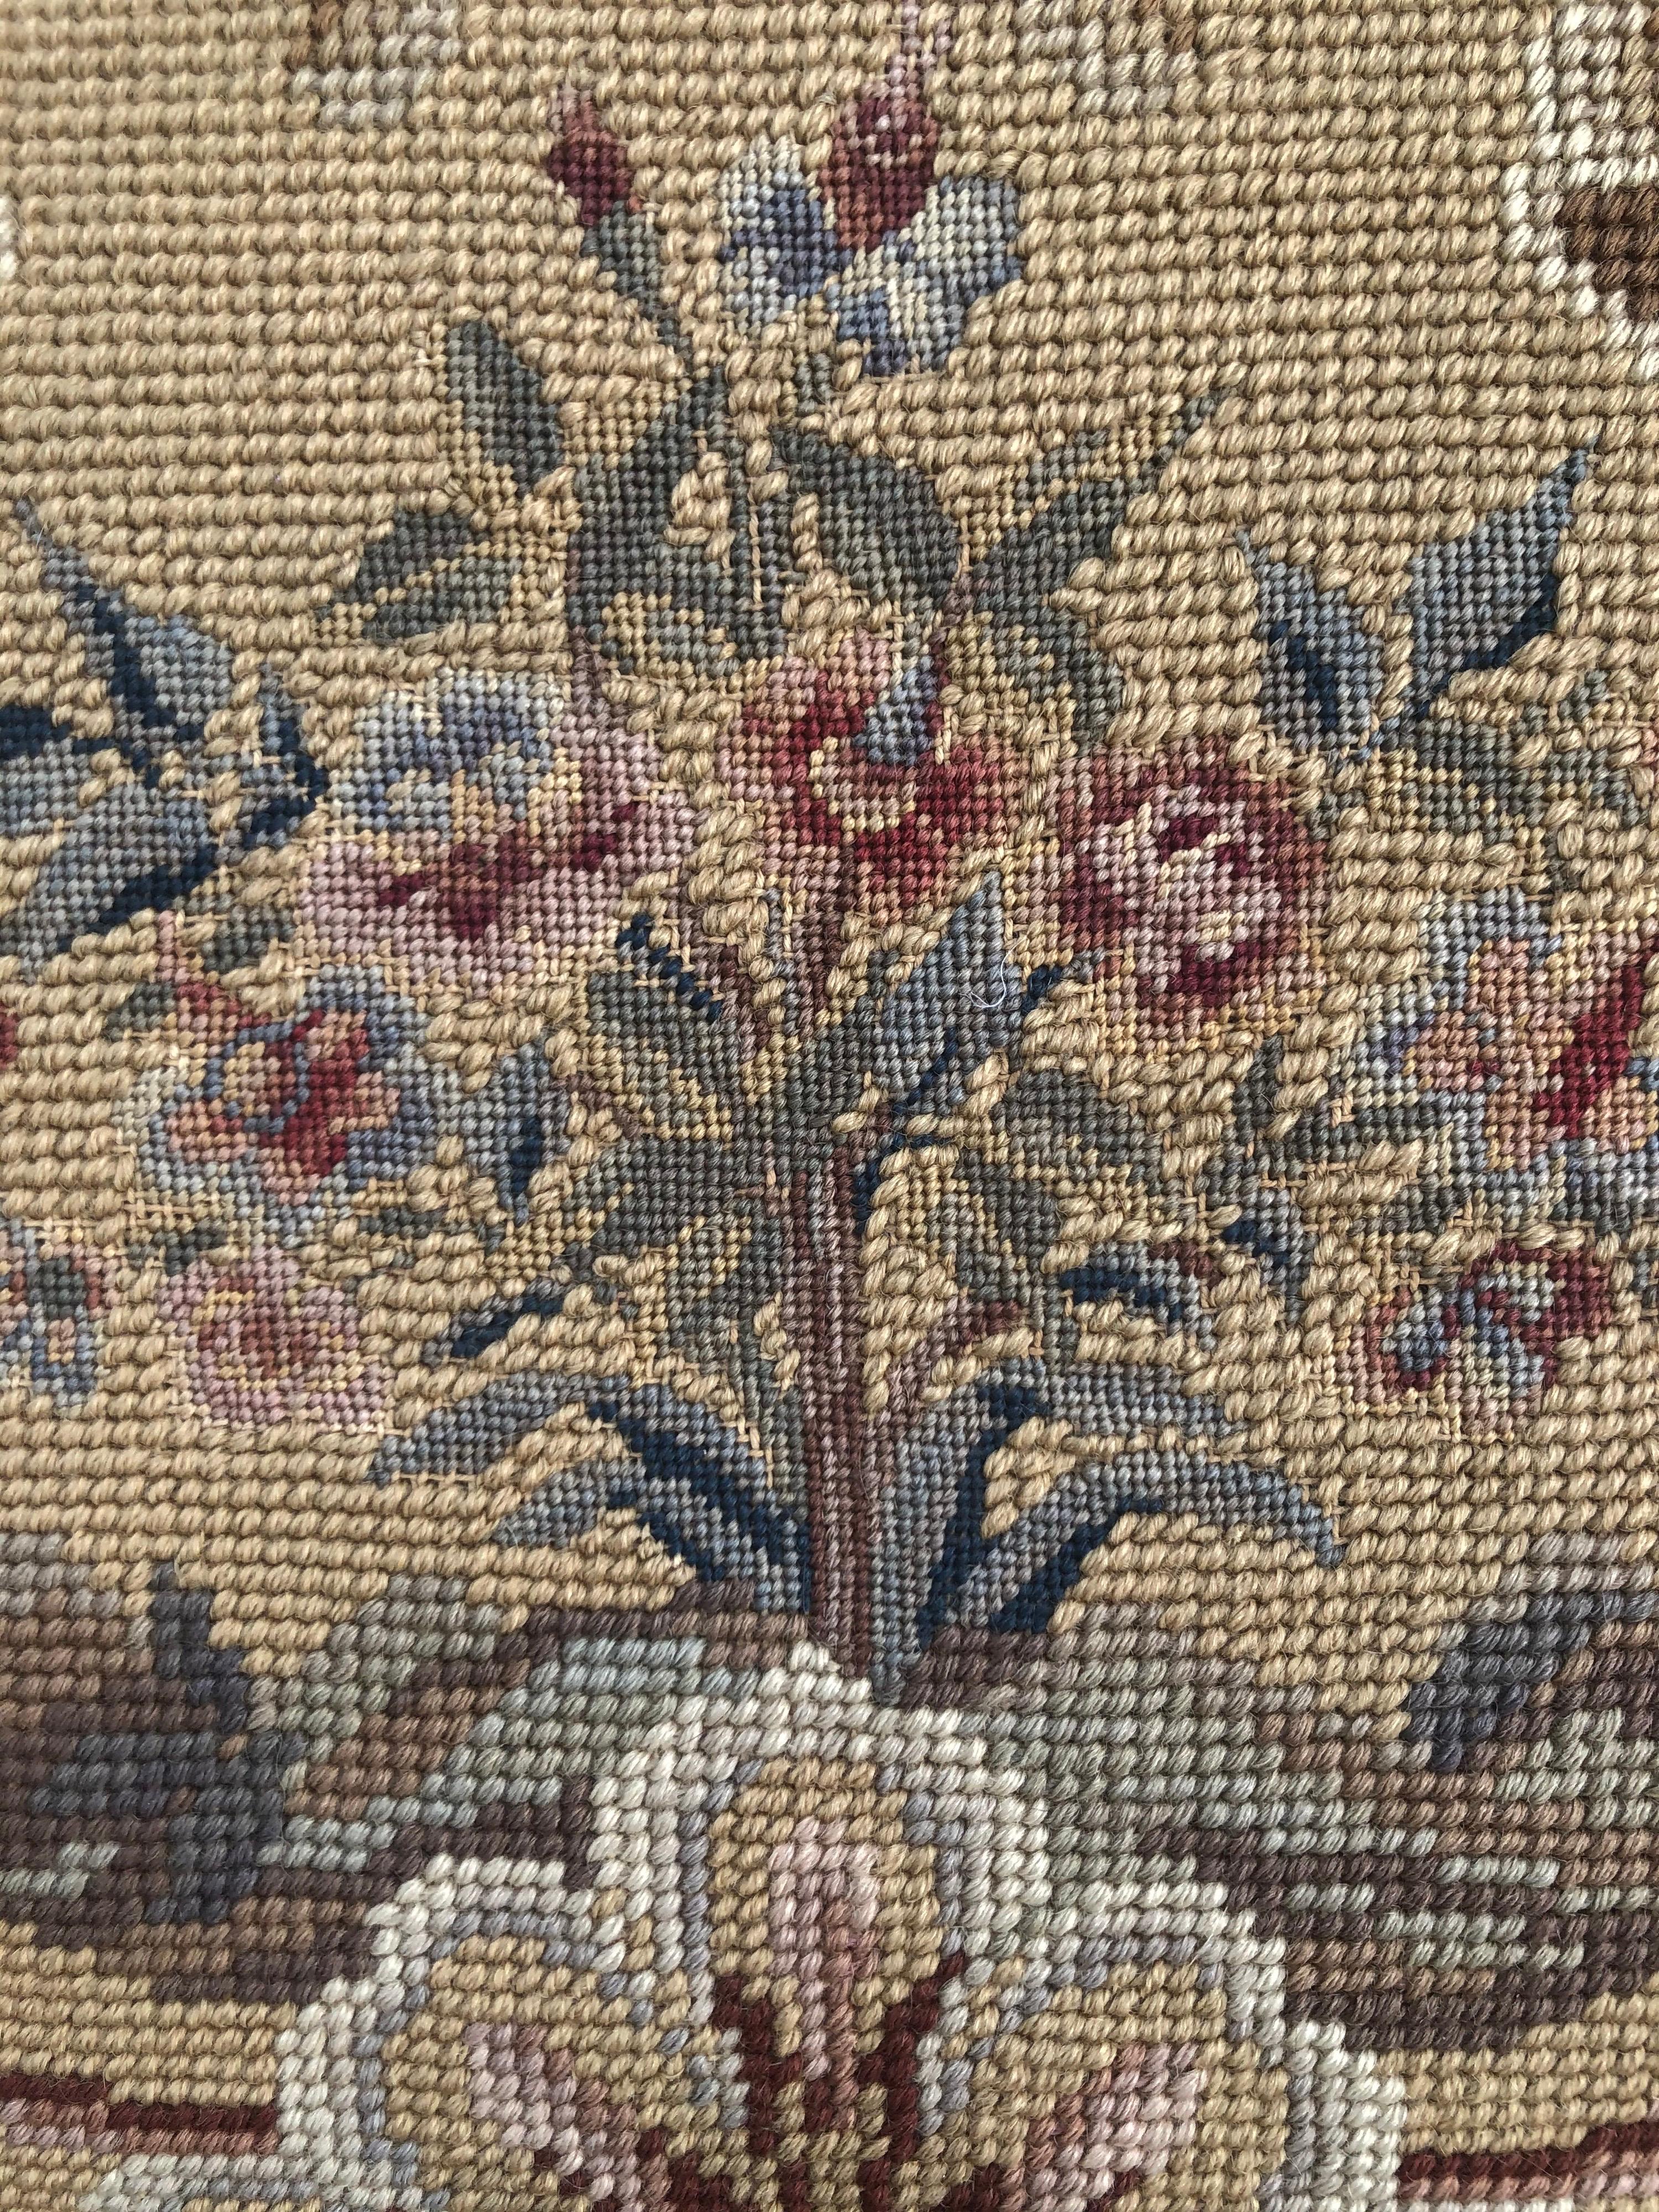 Wool Vintage Needlepoint Upholstery Wall Hanging 